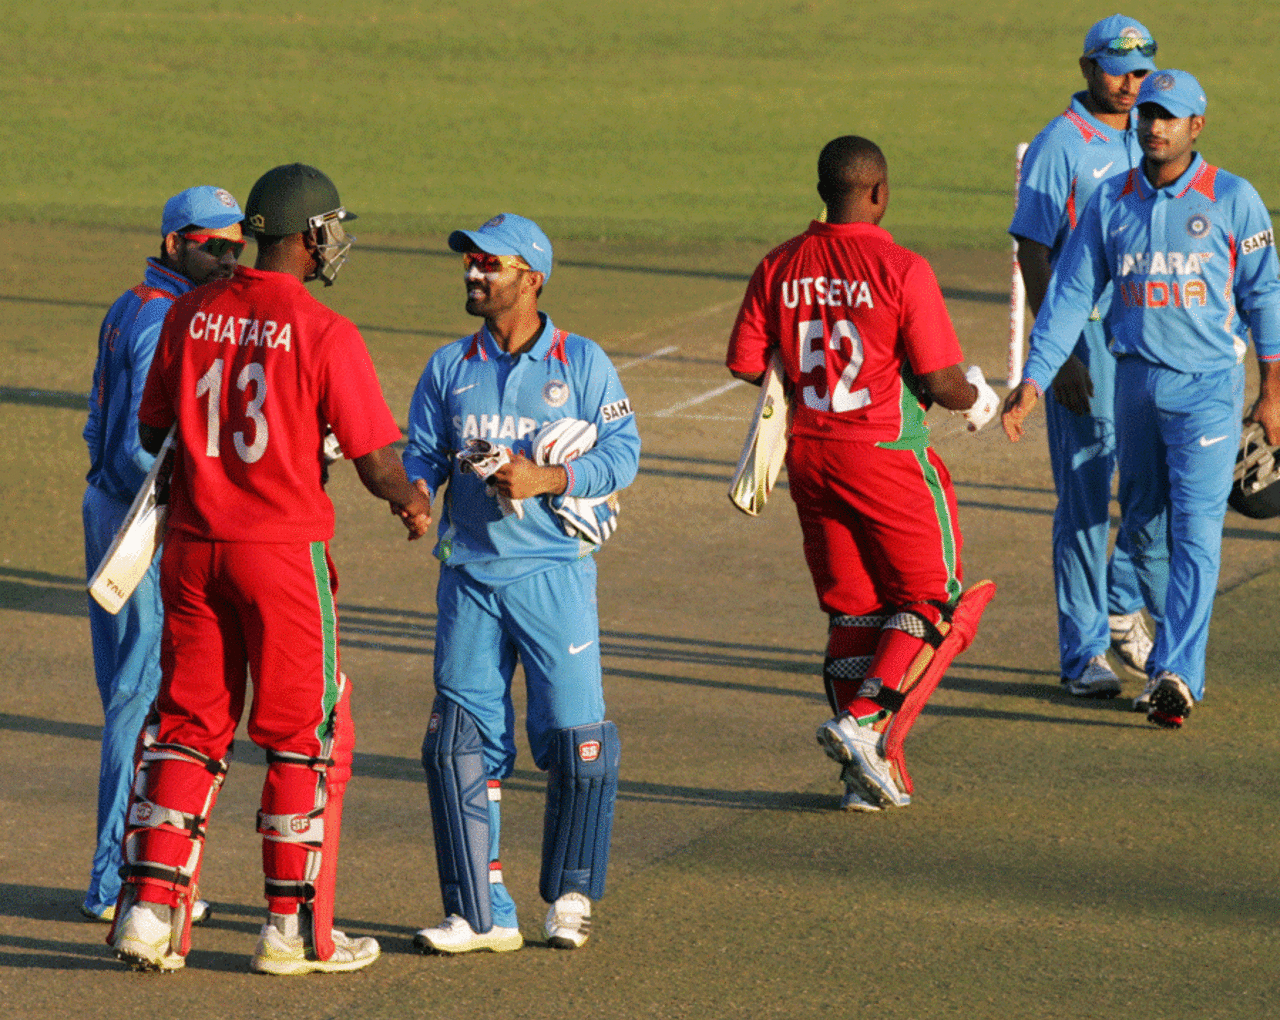 The Indian team is congratulated after their victory over Zimbabwe, Zimbabwe v India, 2nd ODI, Harare, July 26, 2013